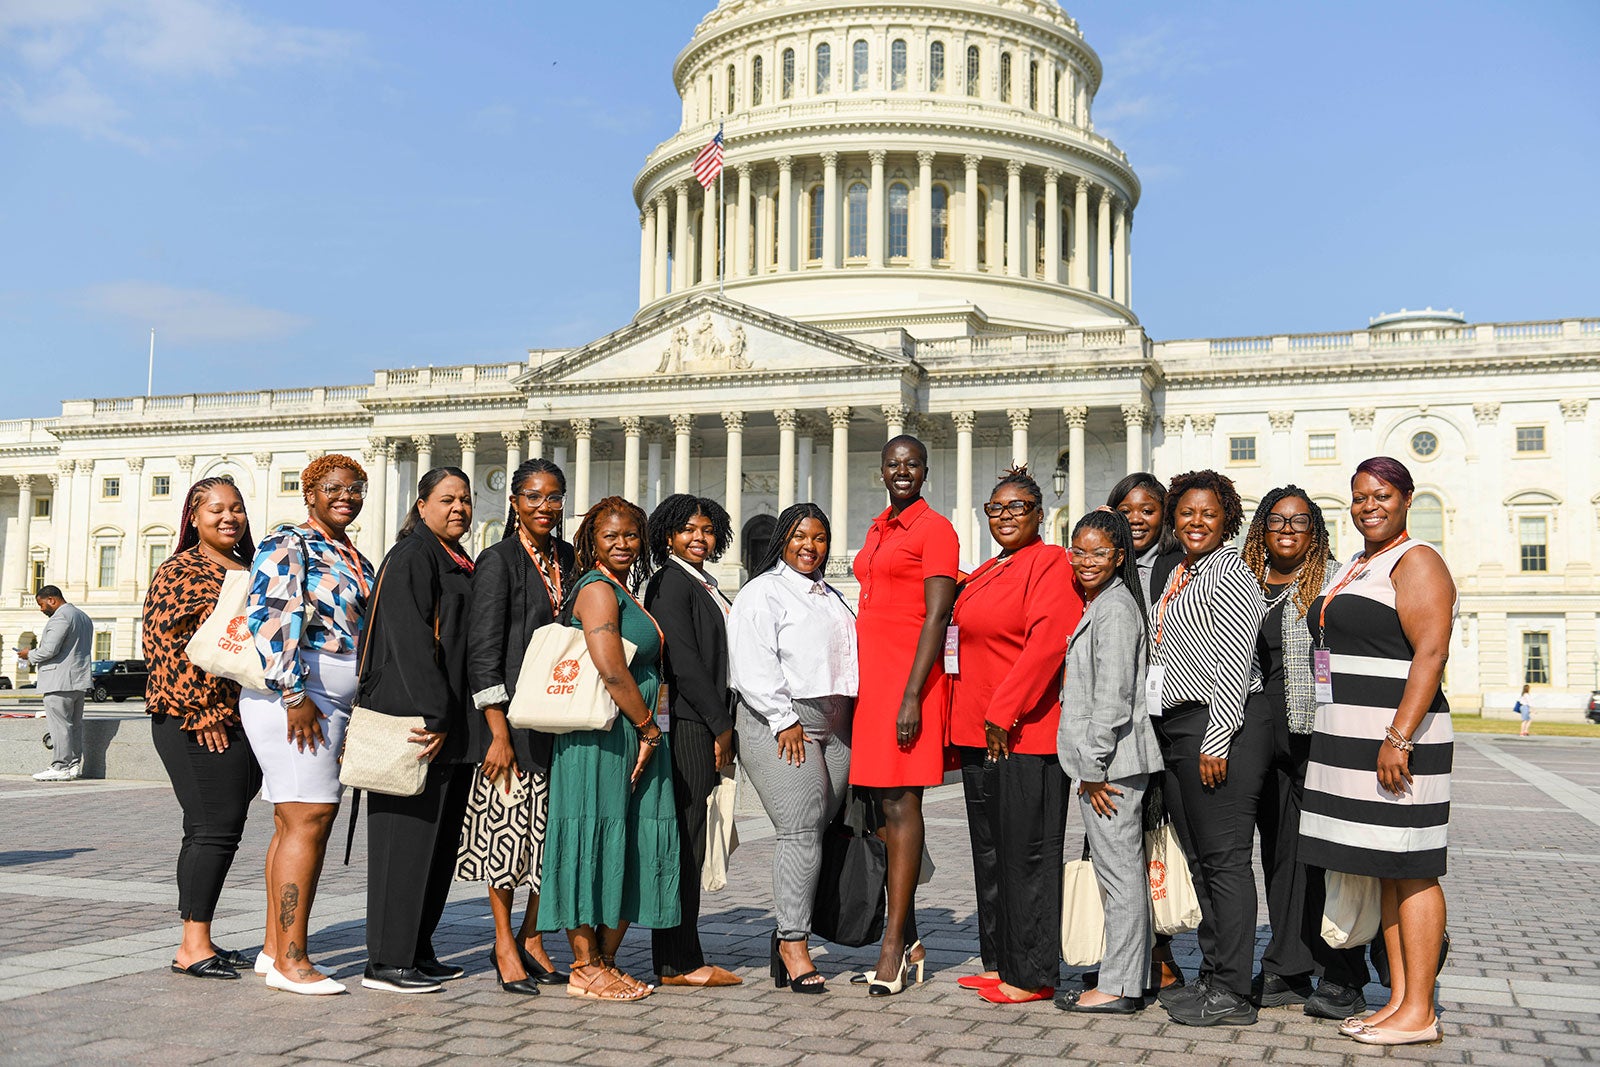 A group of Black women stand together and pose in front of the U.S. Capitol Building. A few are wearing CARE tote bags.